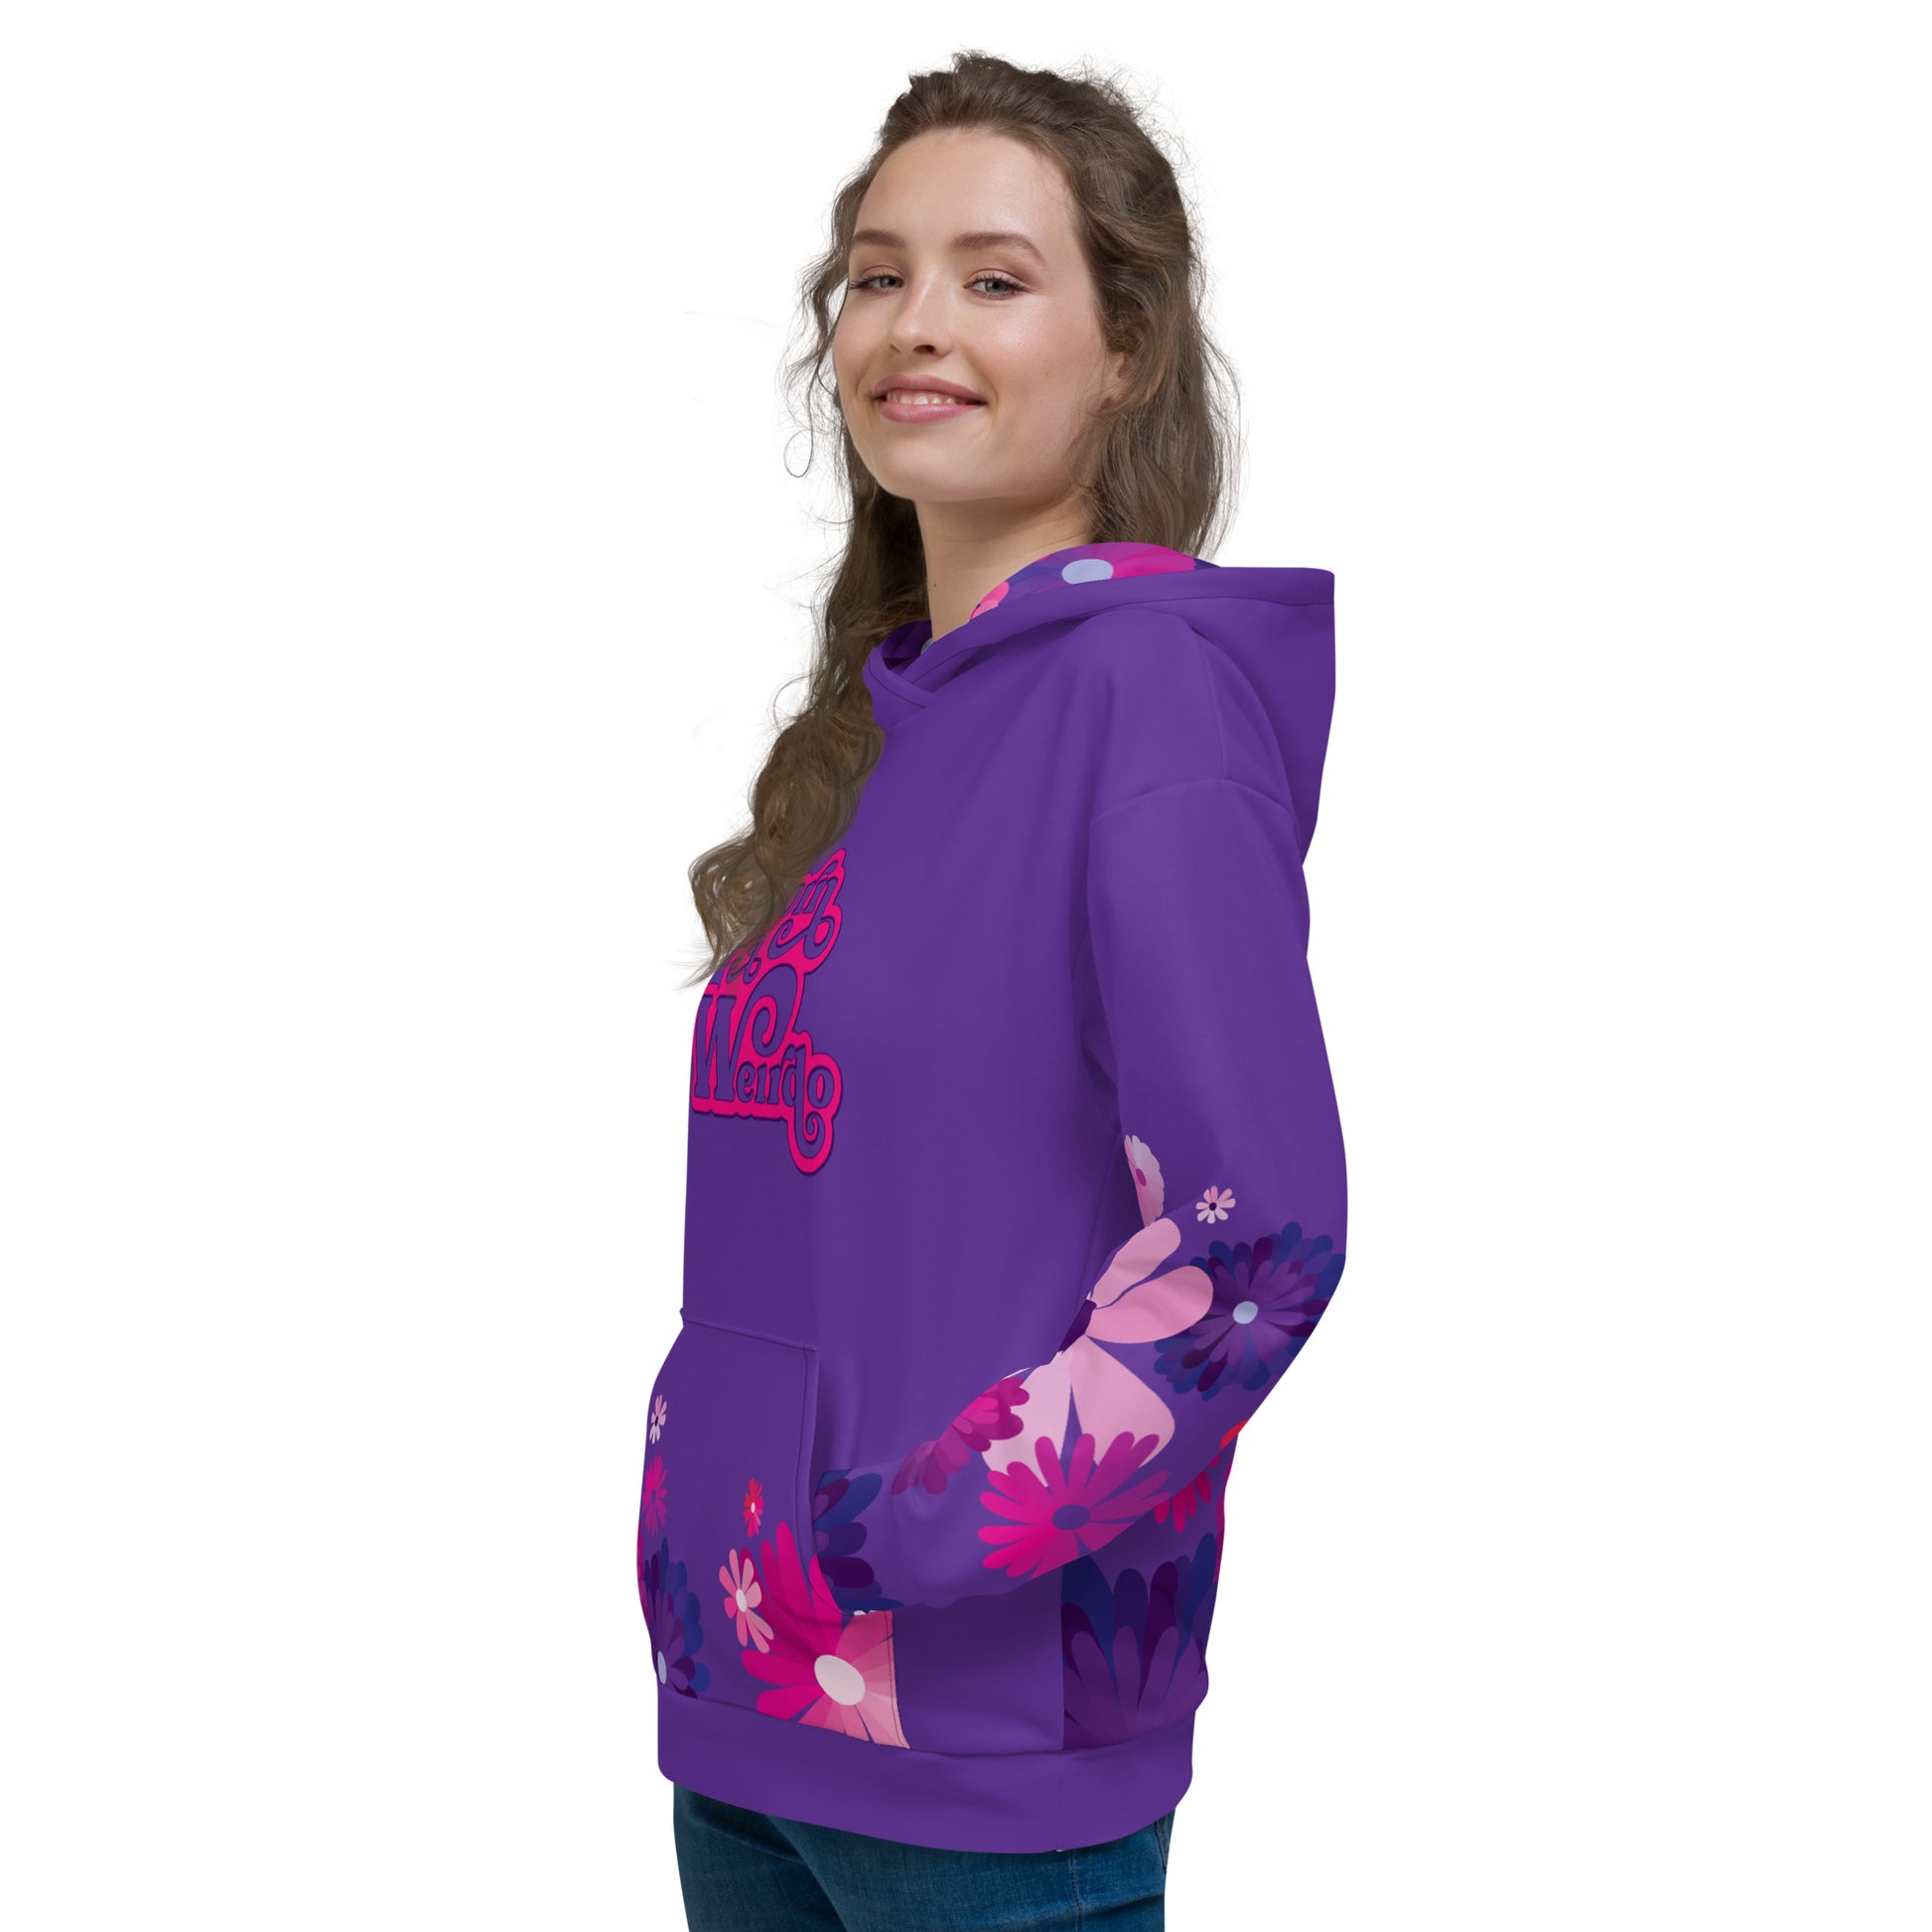 #WEIRDO | Are you BORN A WEIRDO? Check out this awesome hoodie for weirdos who are born this way! Purple hoodie with pink flowers.